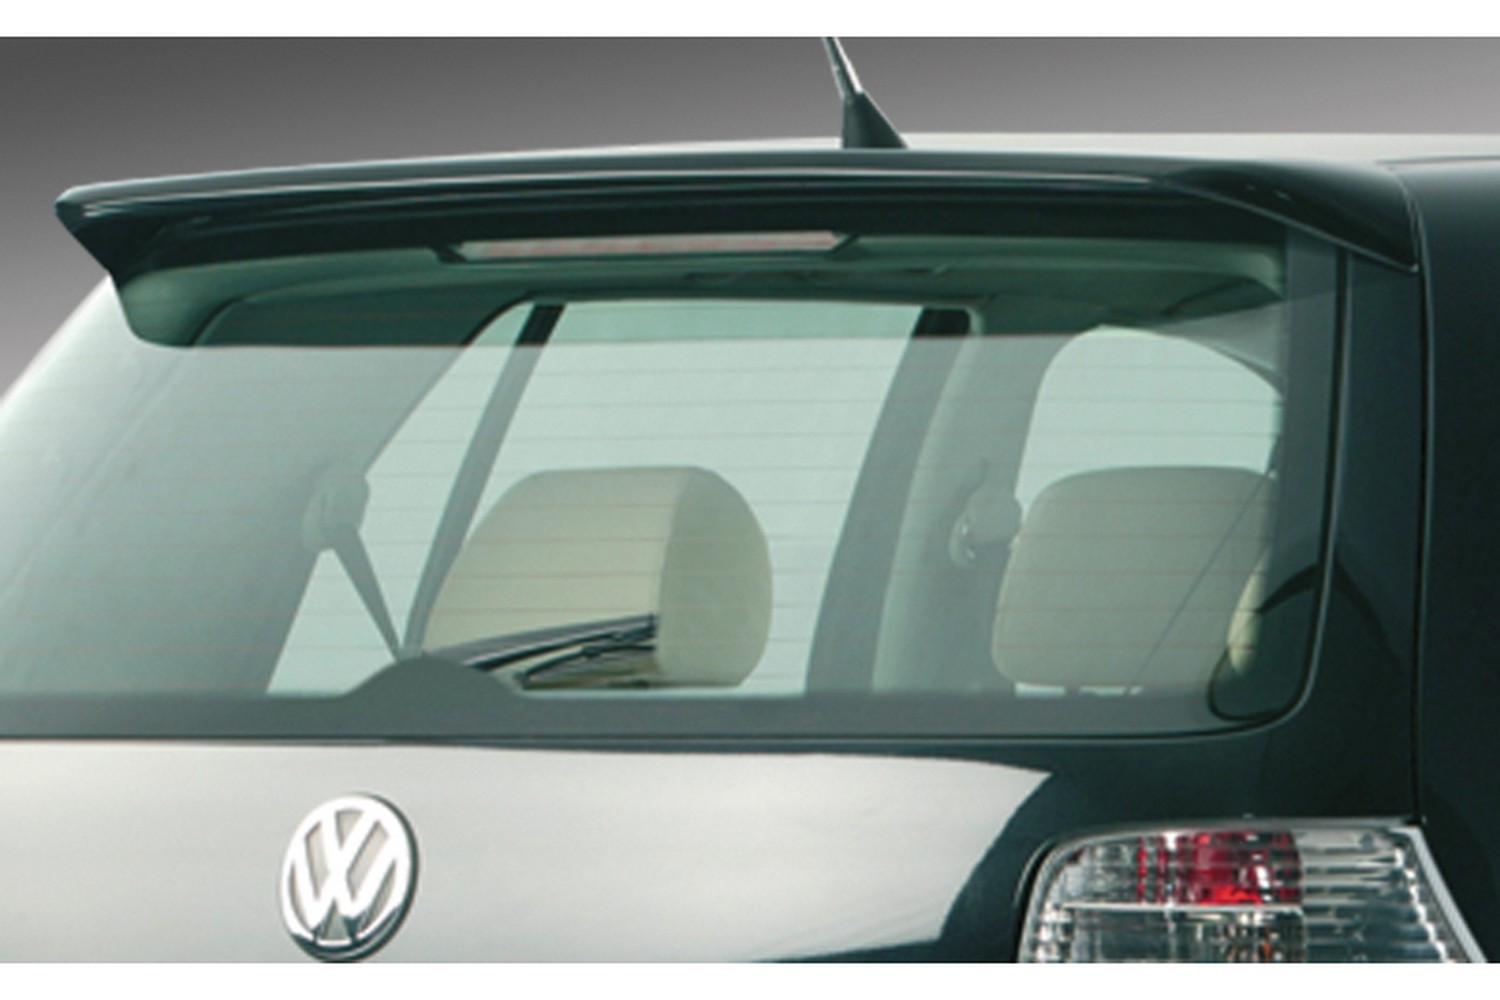 Roof Spoiler for VW Golf 4 1997-2005 v1 - AVOGroup - Auto Parts